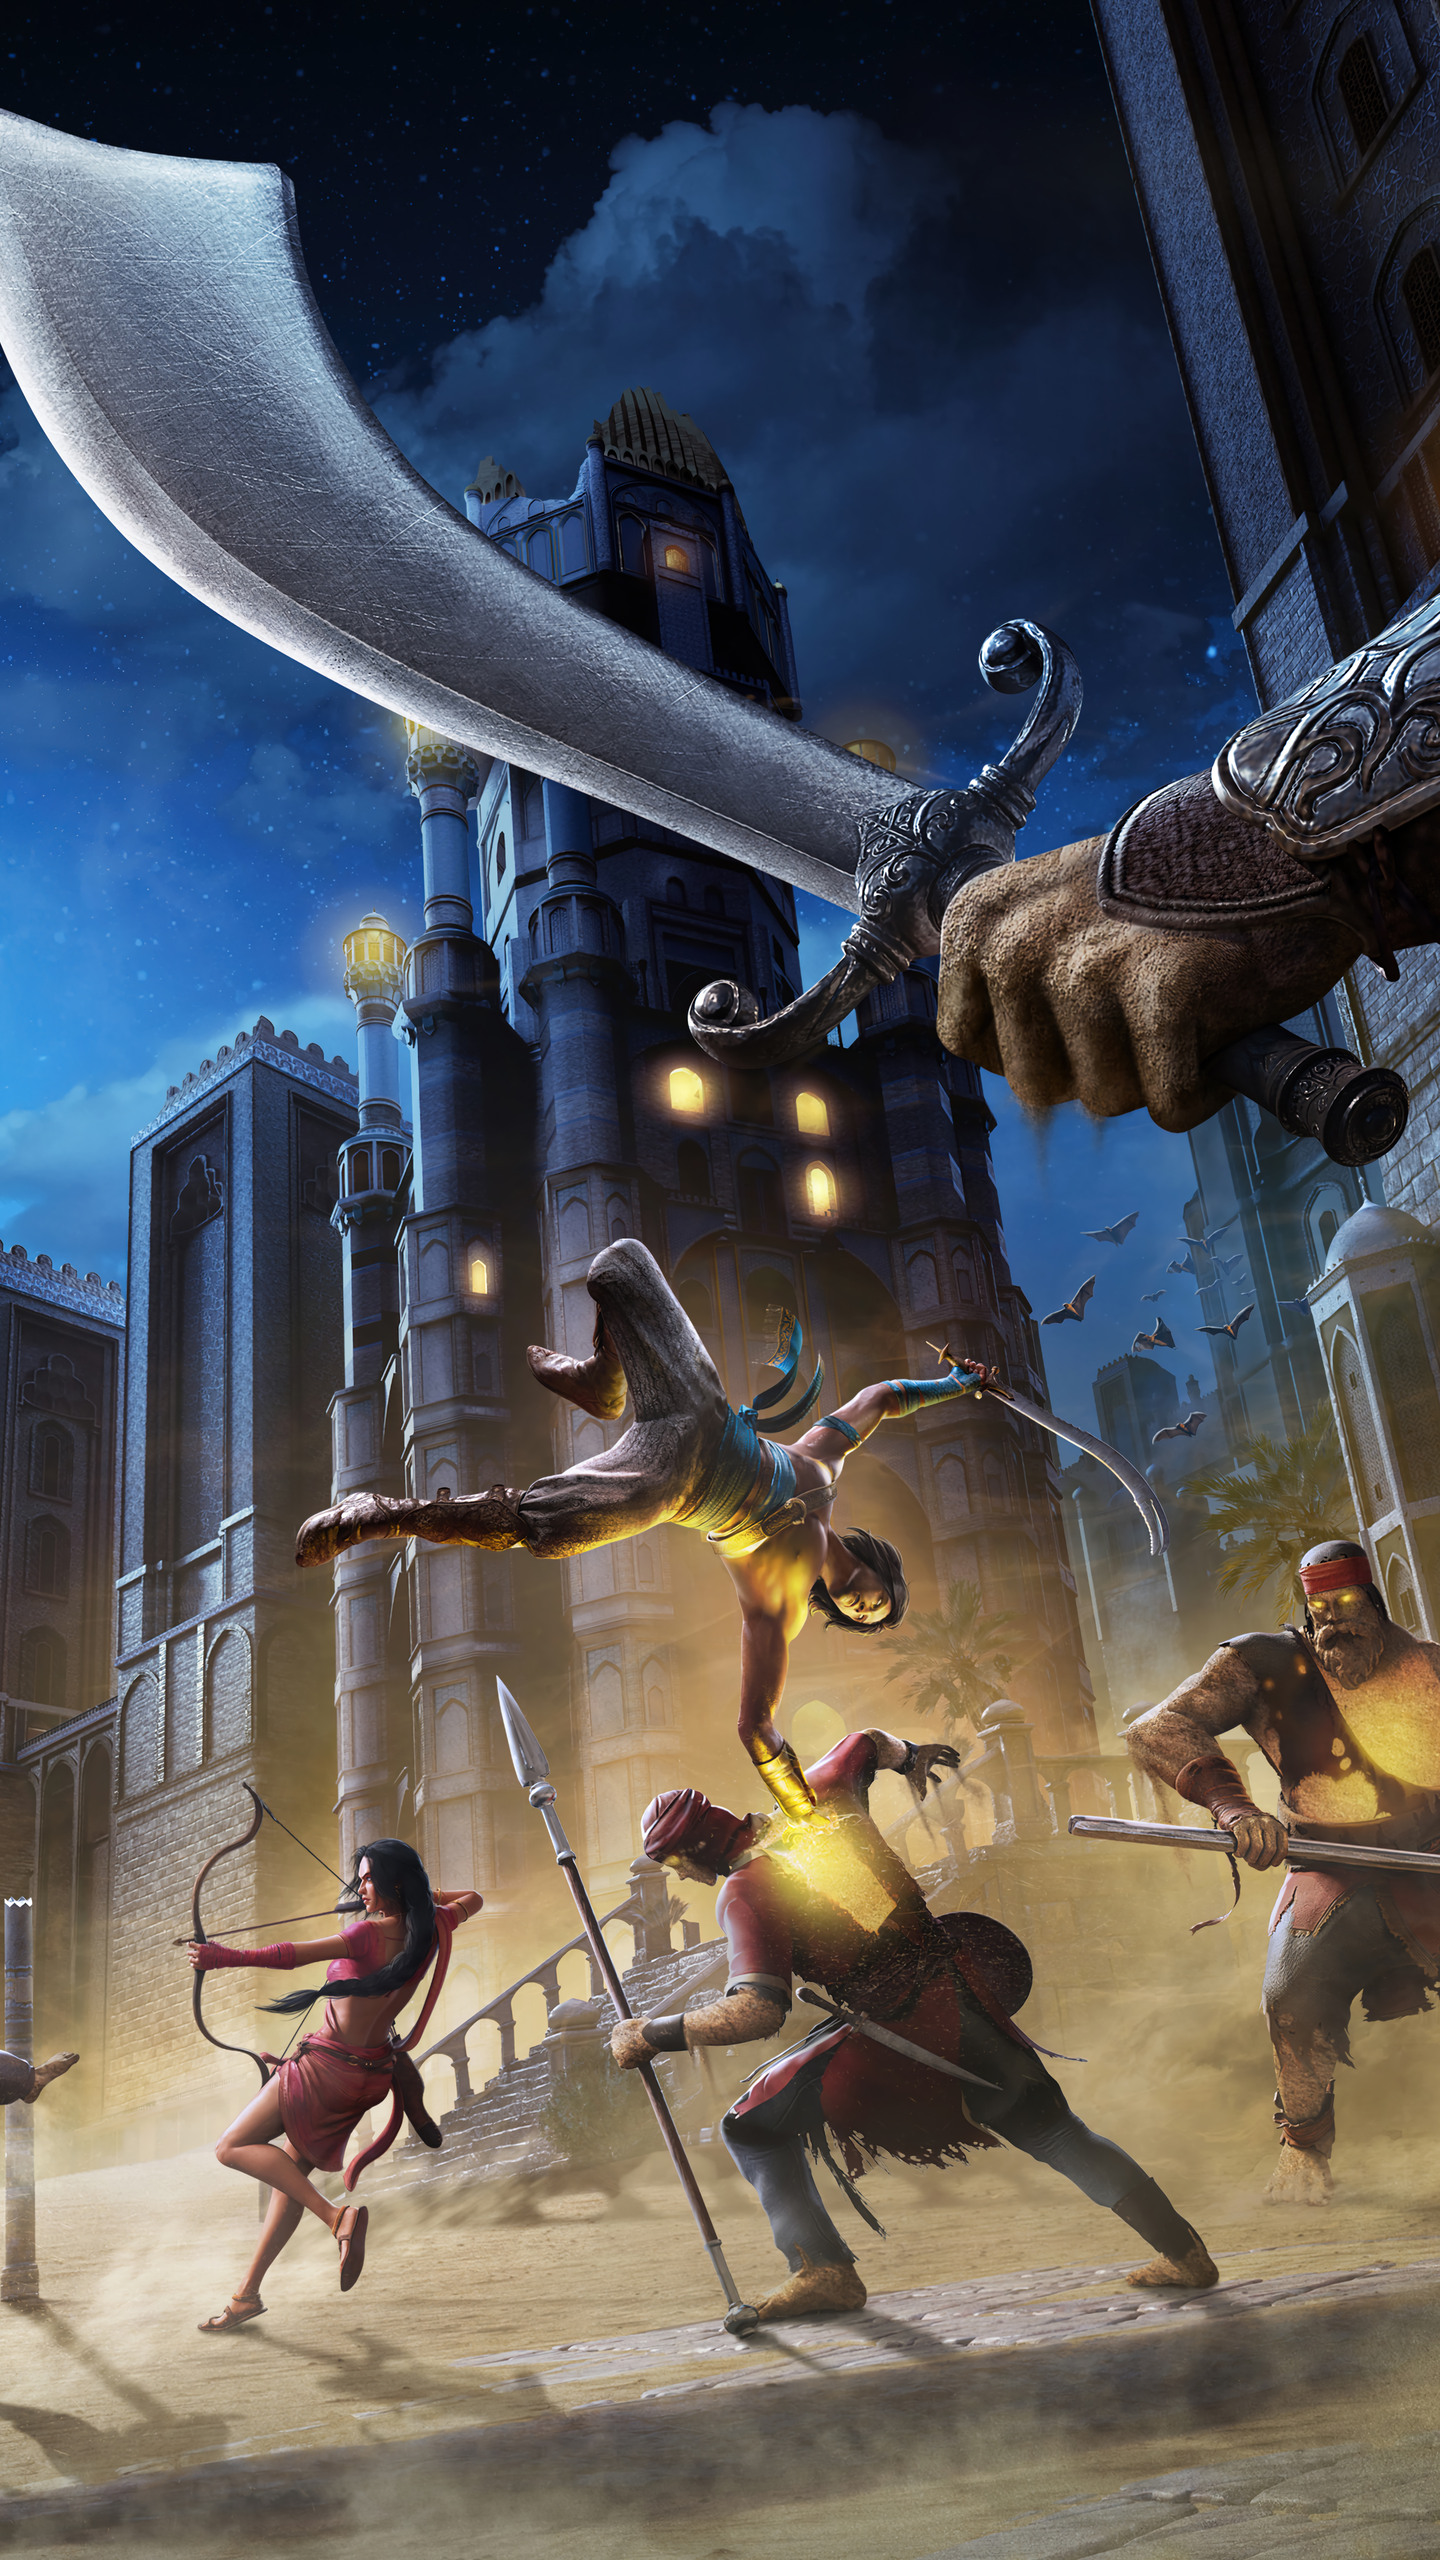 Prince Of Persia The Sands Time Remake Wallpaper 4k iPhone